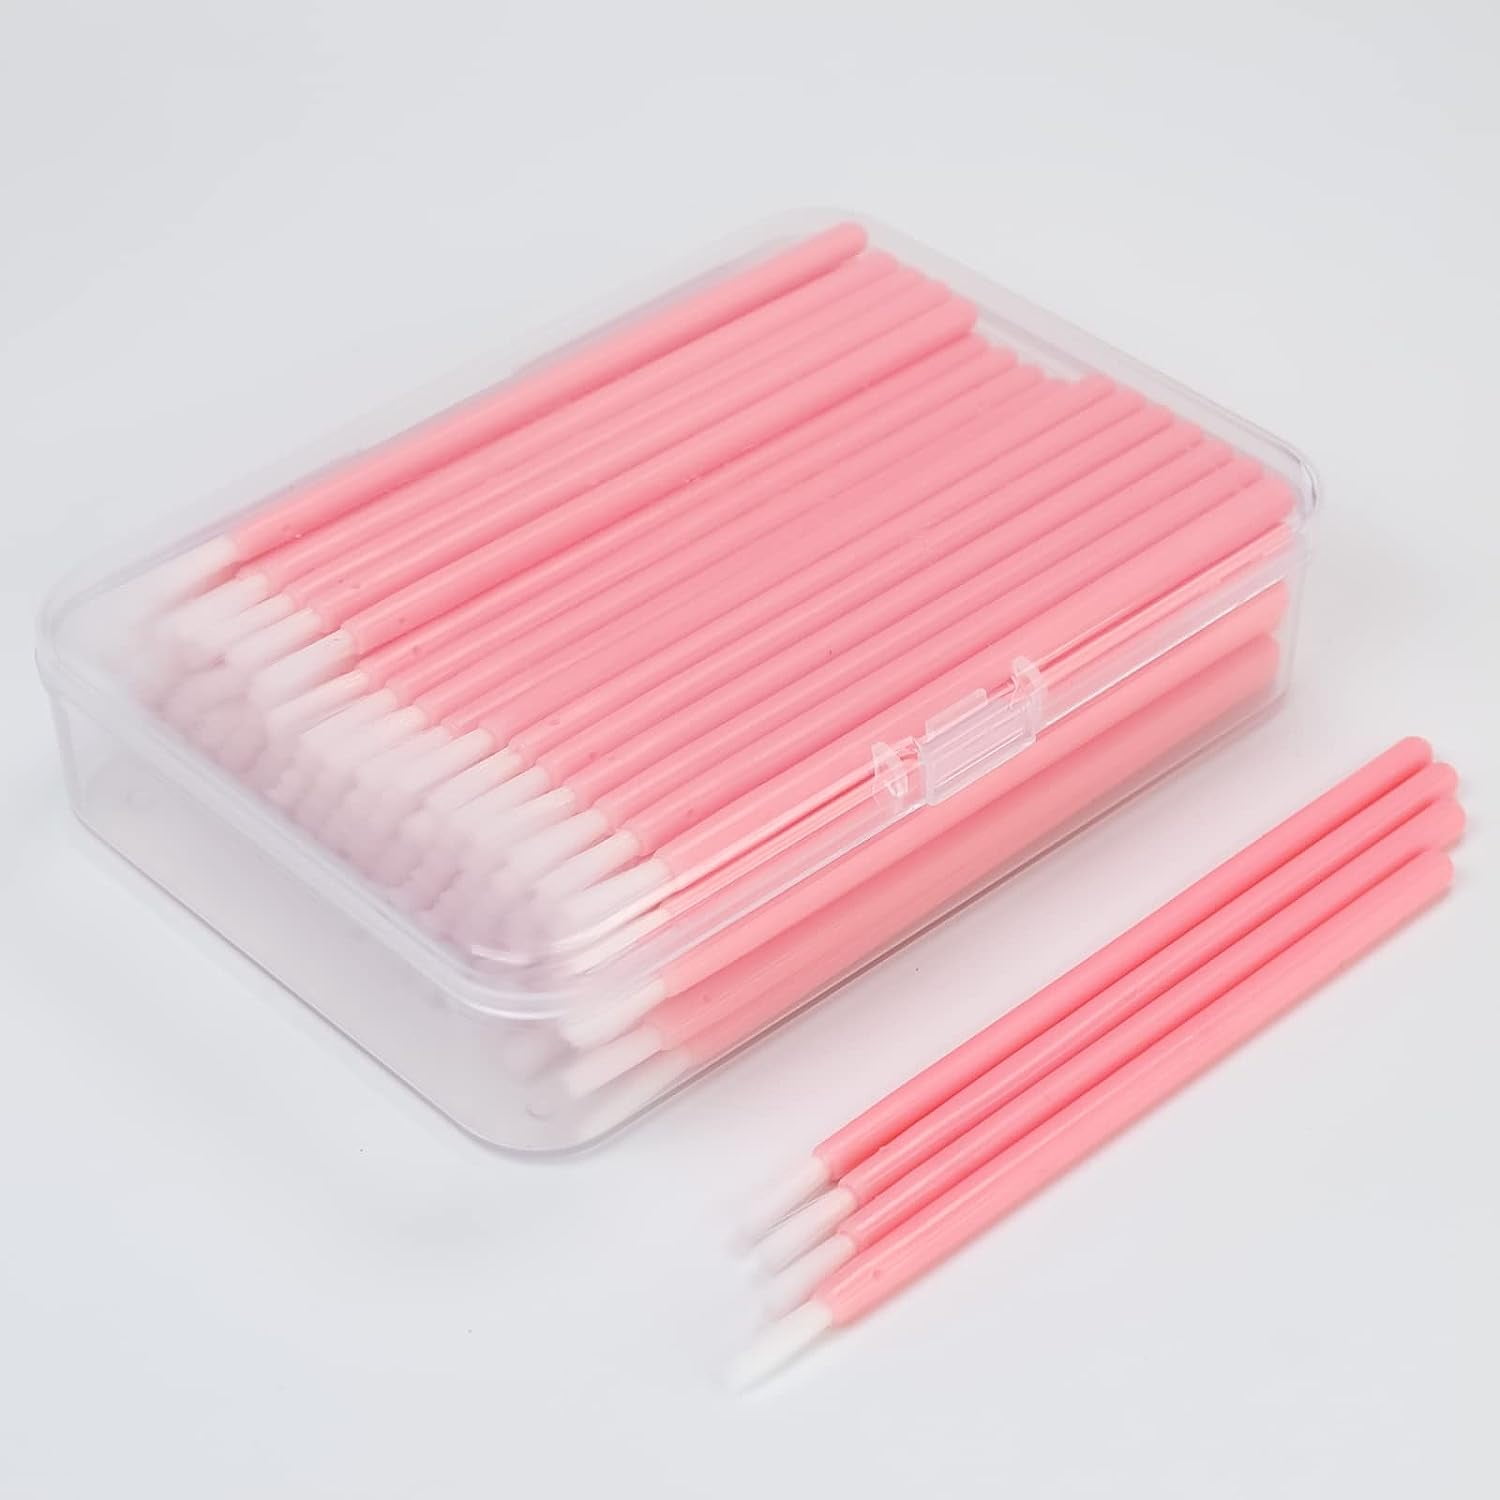 Disposable Paint Brushes - perfect for Paint Your Own cookies